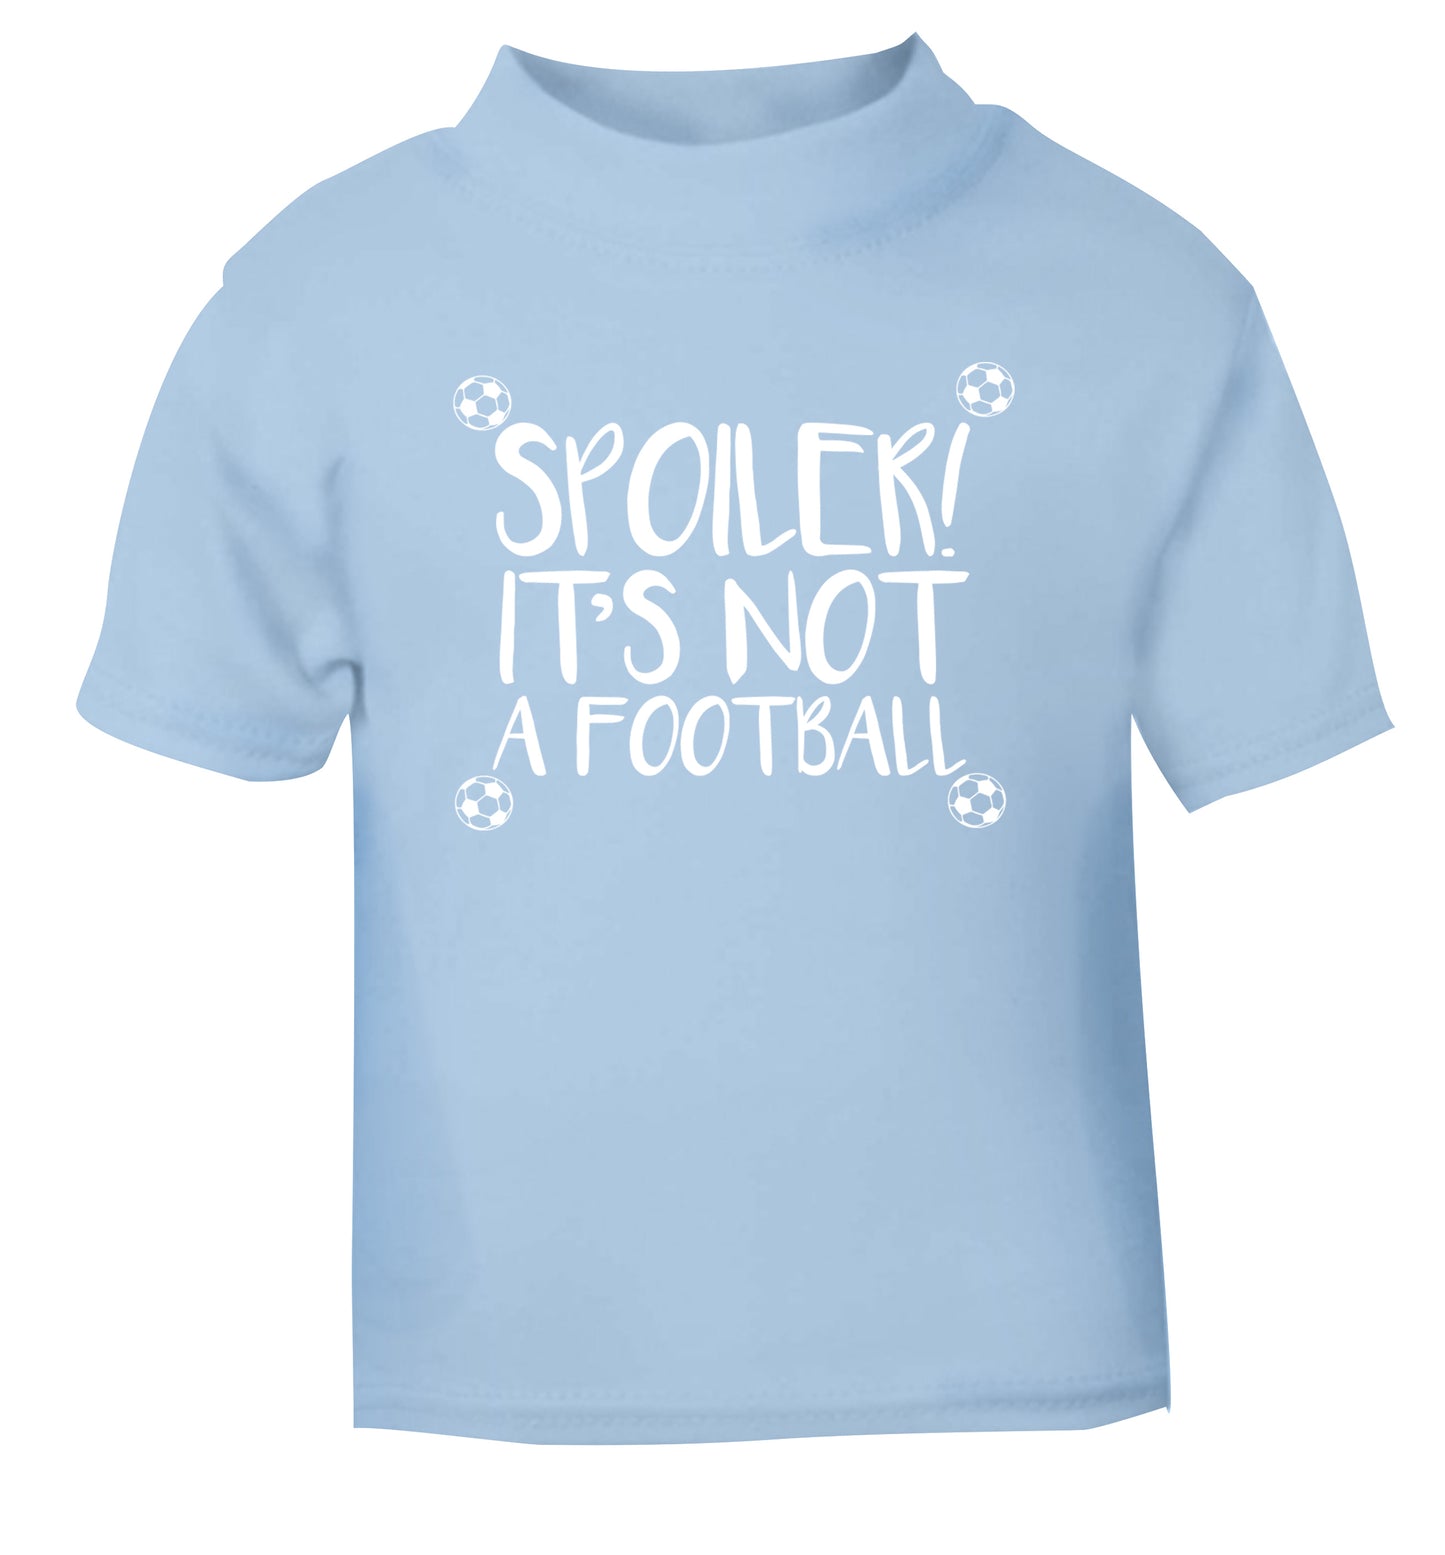 Spoiler it's not a football light blue Baby Toddler Tshirt 2 Years